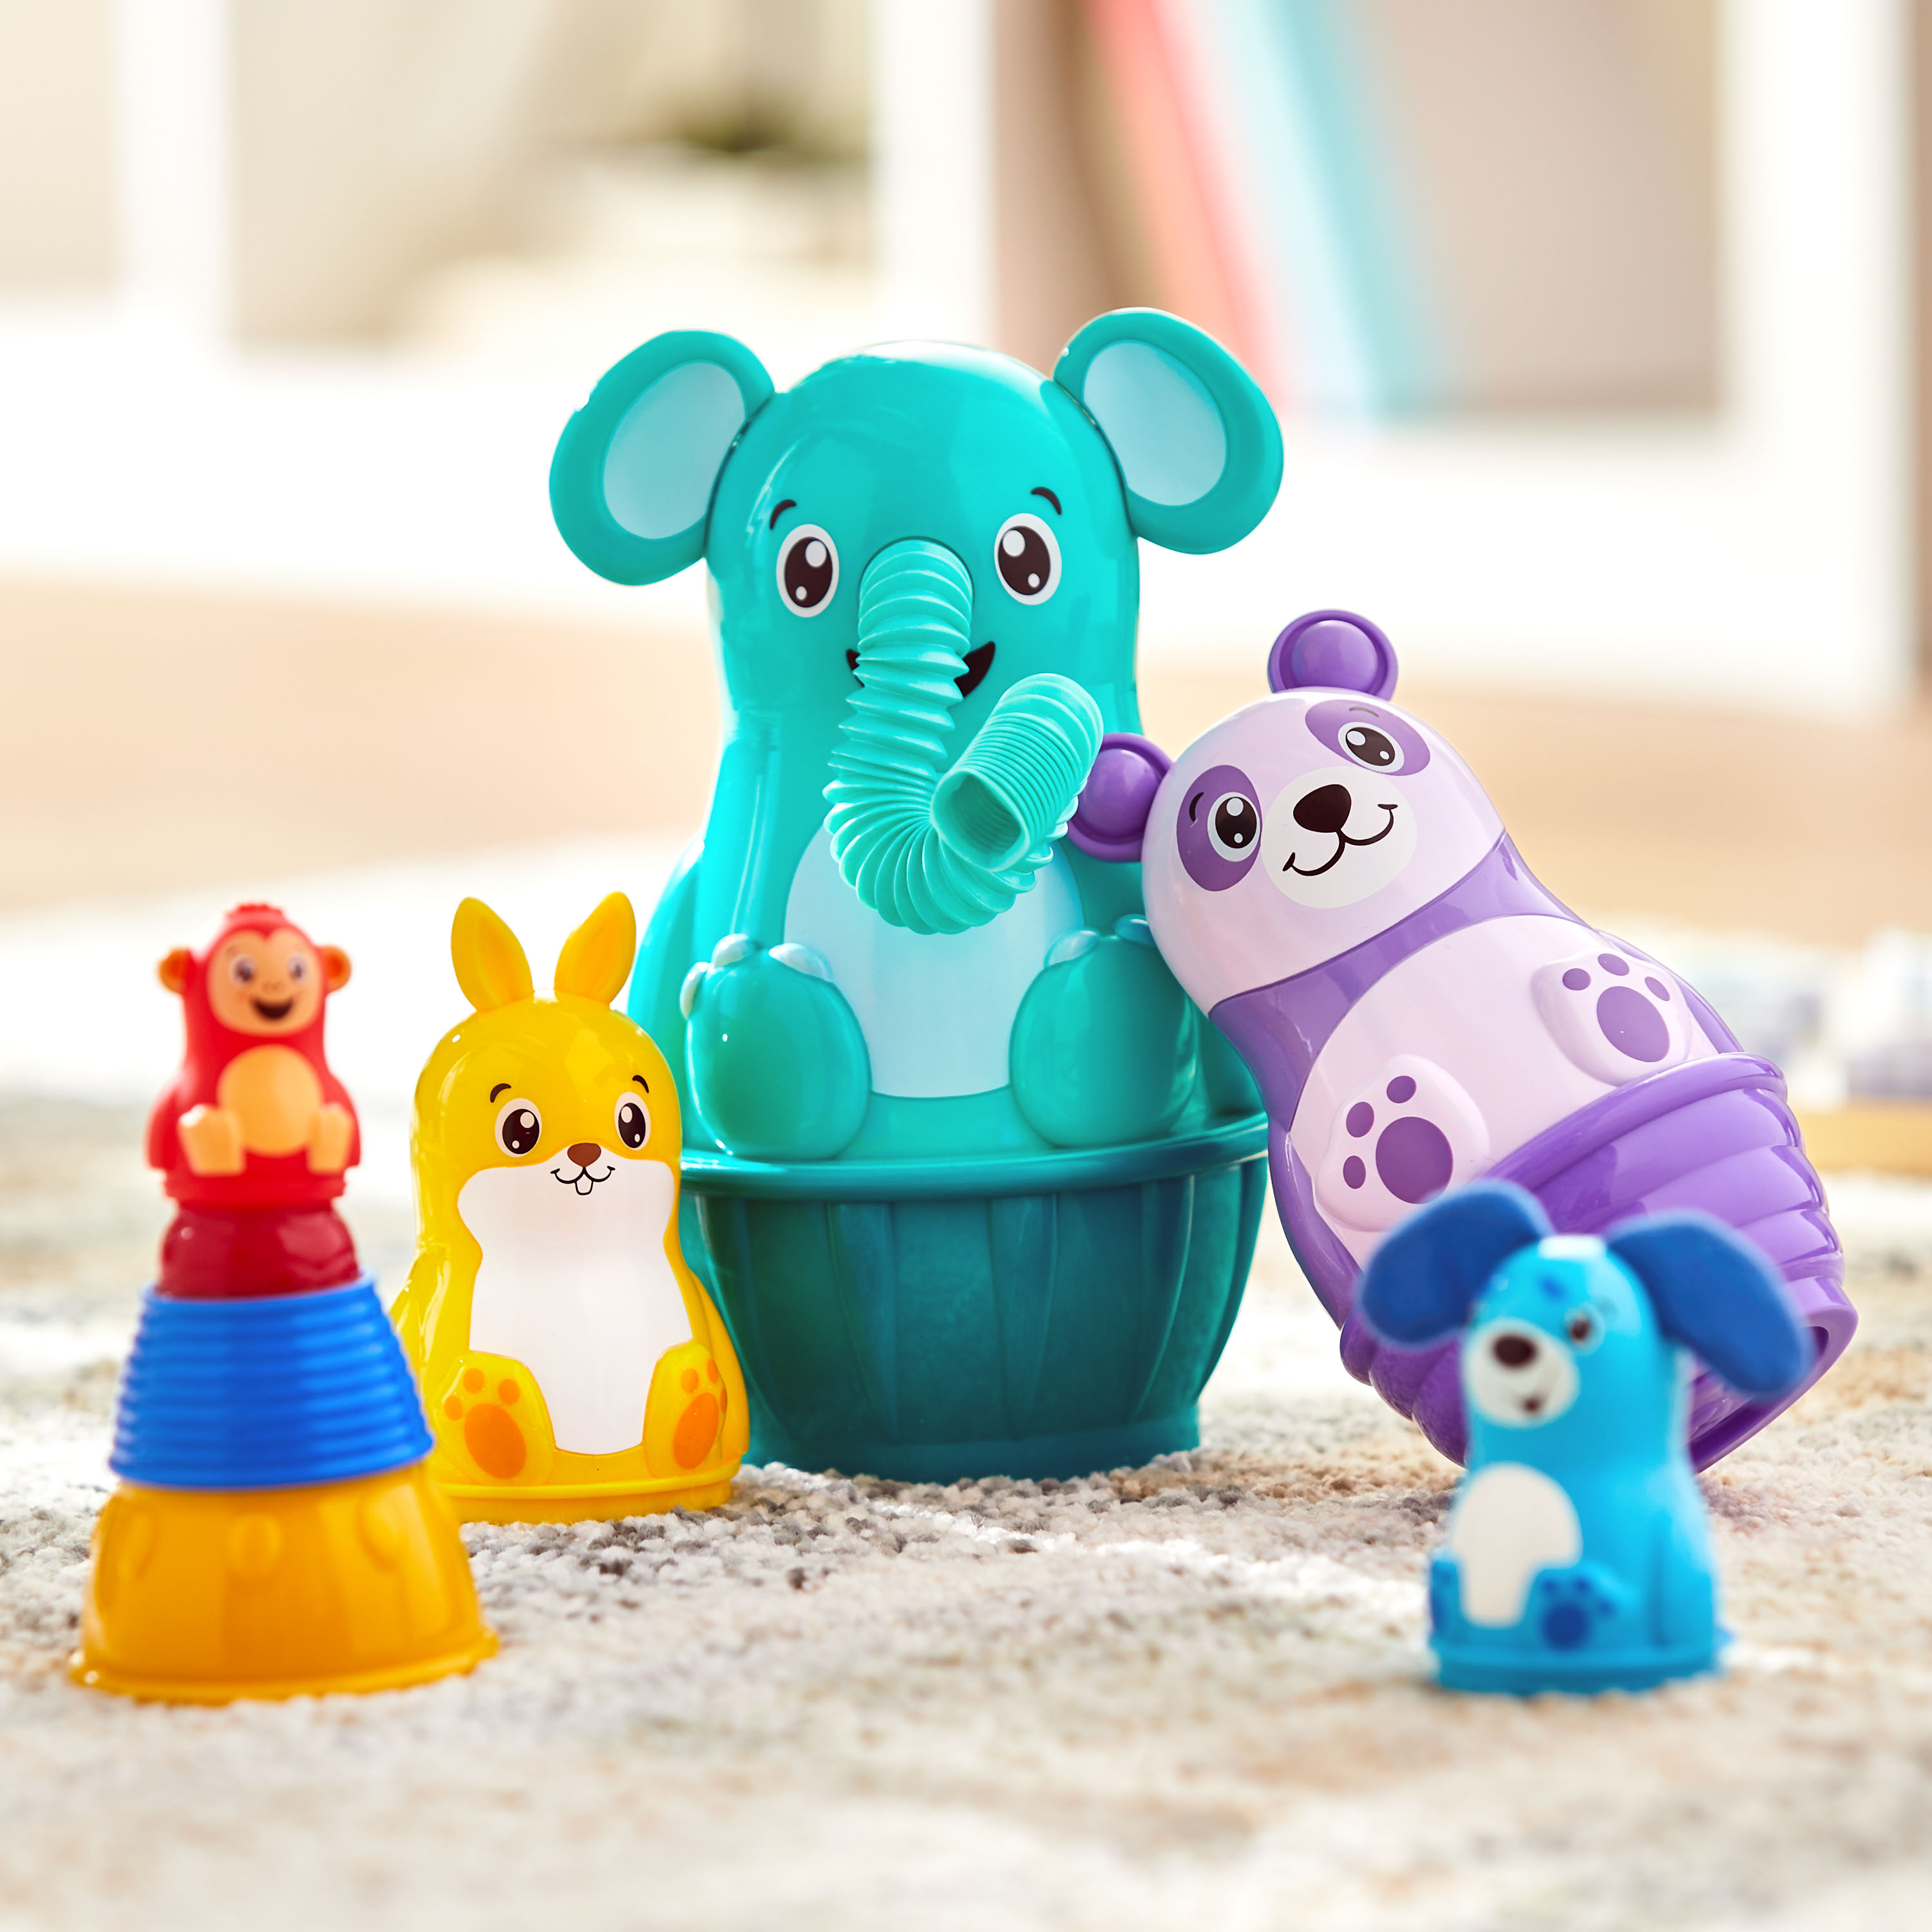 Spark Create Imagine Stack ‘N Nest Animals Toy Set 5 Nesting Pets 5 Stackable Cups Kids, 12 Months+, Unisex - image 3 of 8